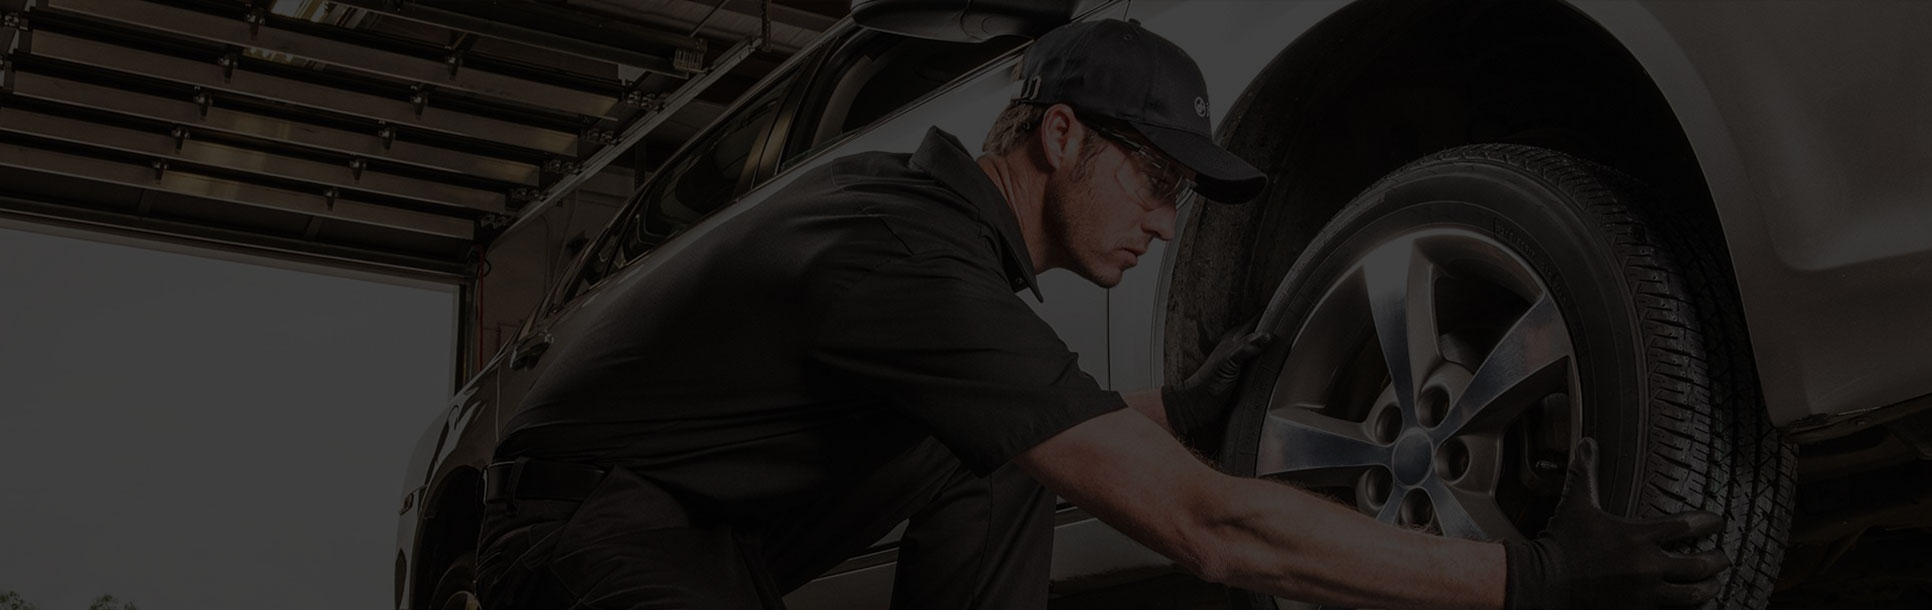 Tires and Repair Services - Tire Rotation, Installation and Replacement